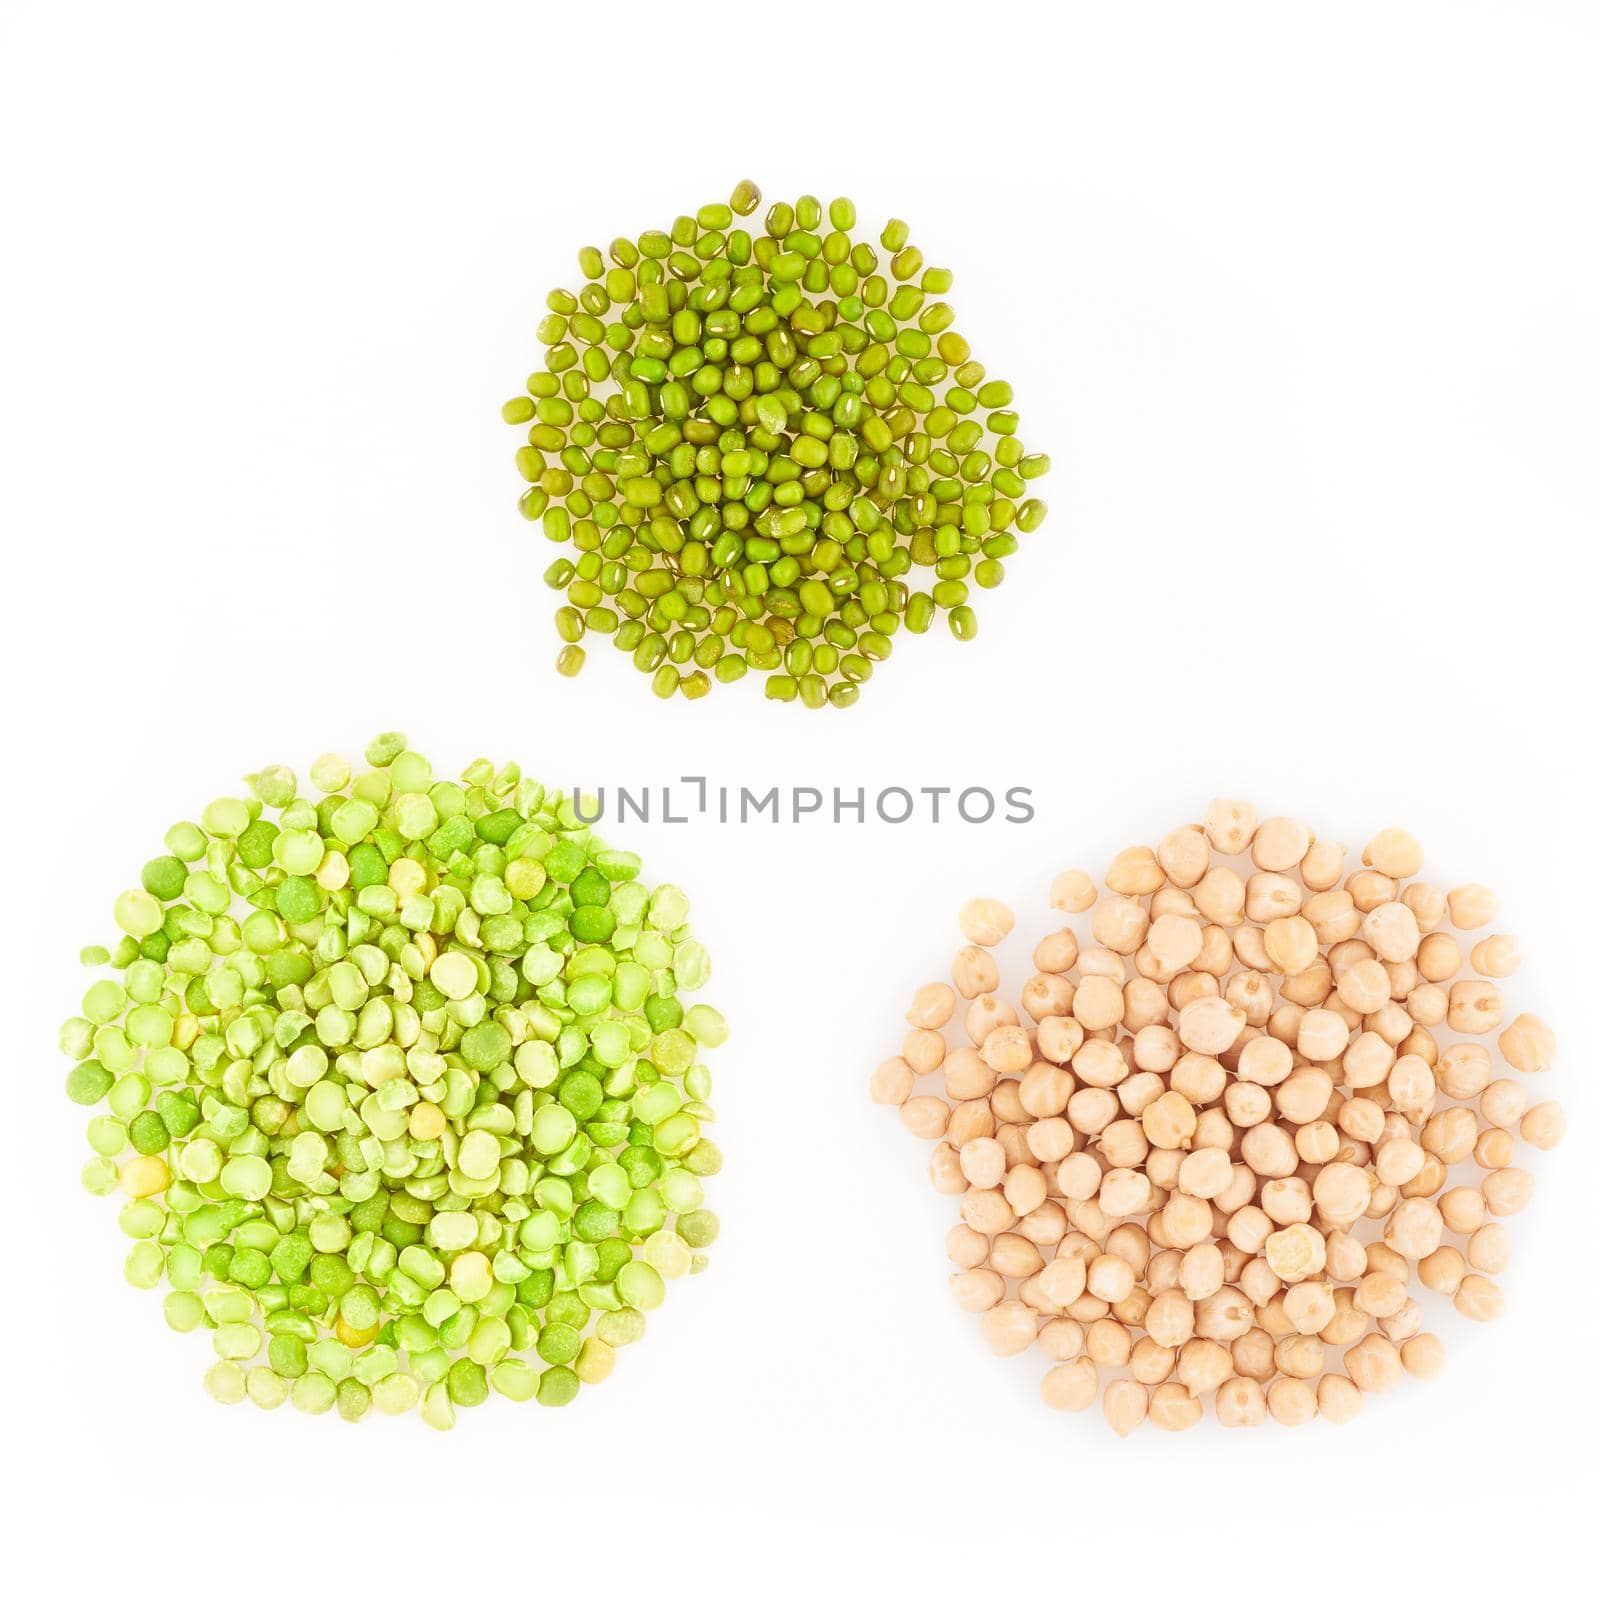 three kinds of raw dried legumes - chickpeas, mung bean, green peas, isolated on white background by NataBene